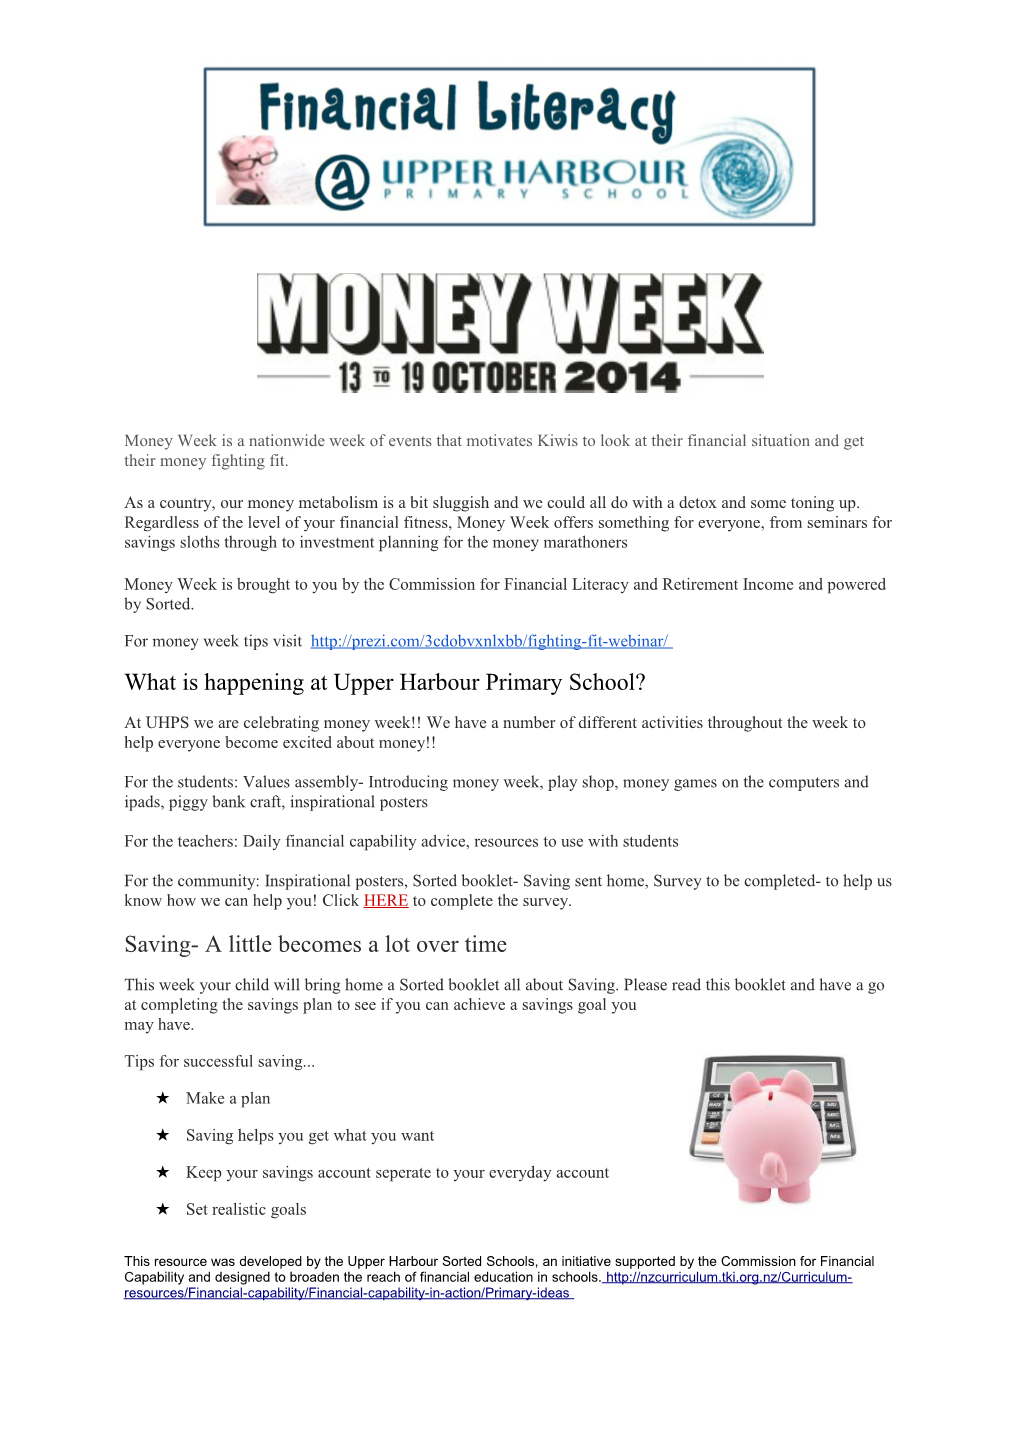 Money Week Is a Nationwide Week of Events That Motivates Kiwis to Look at Their Financial